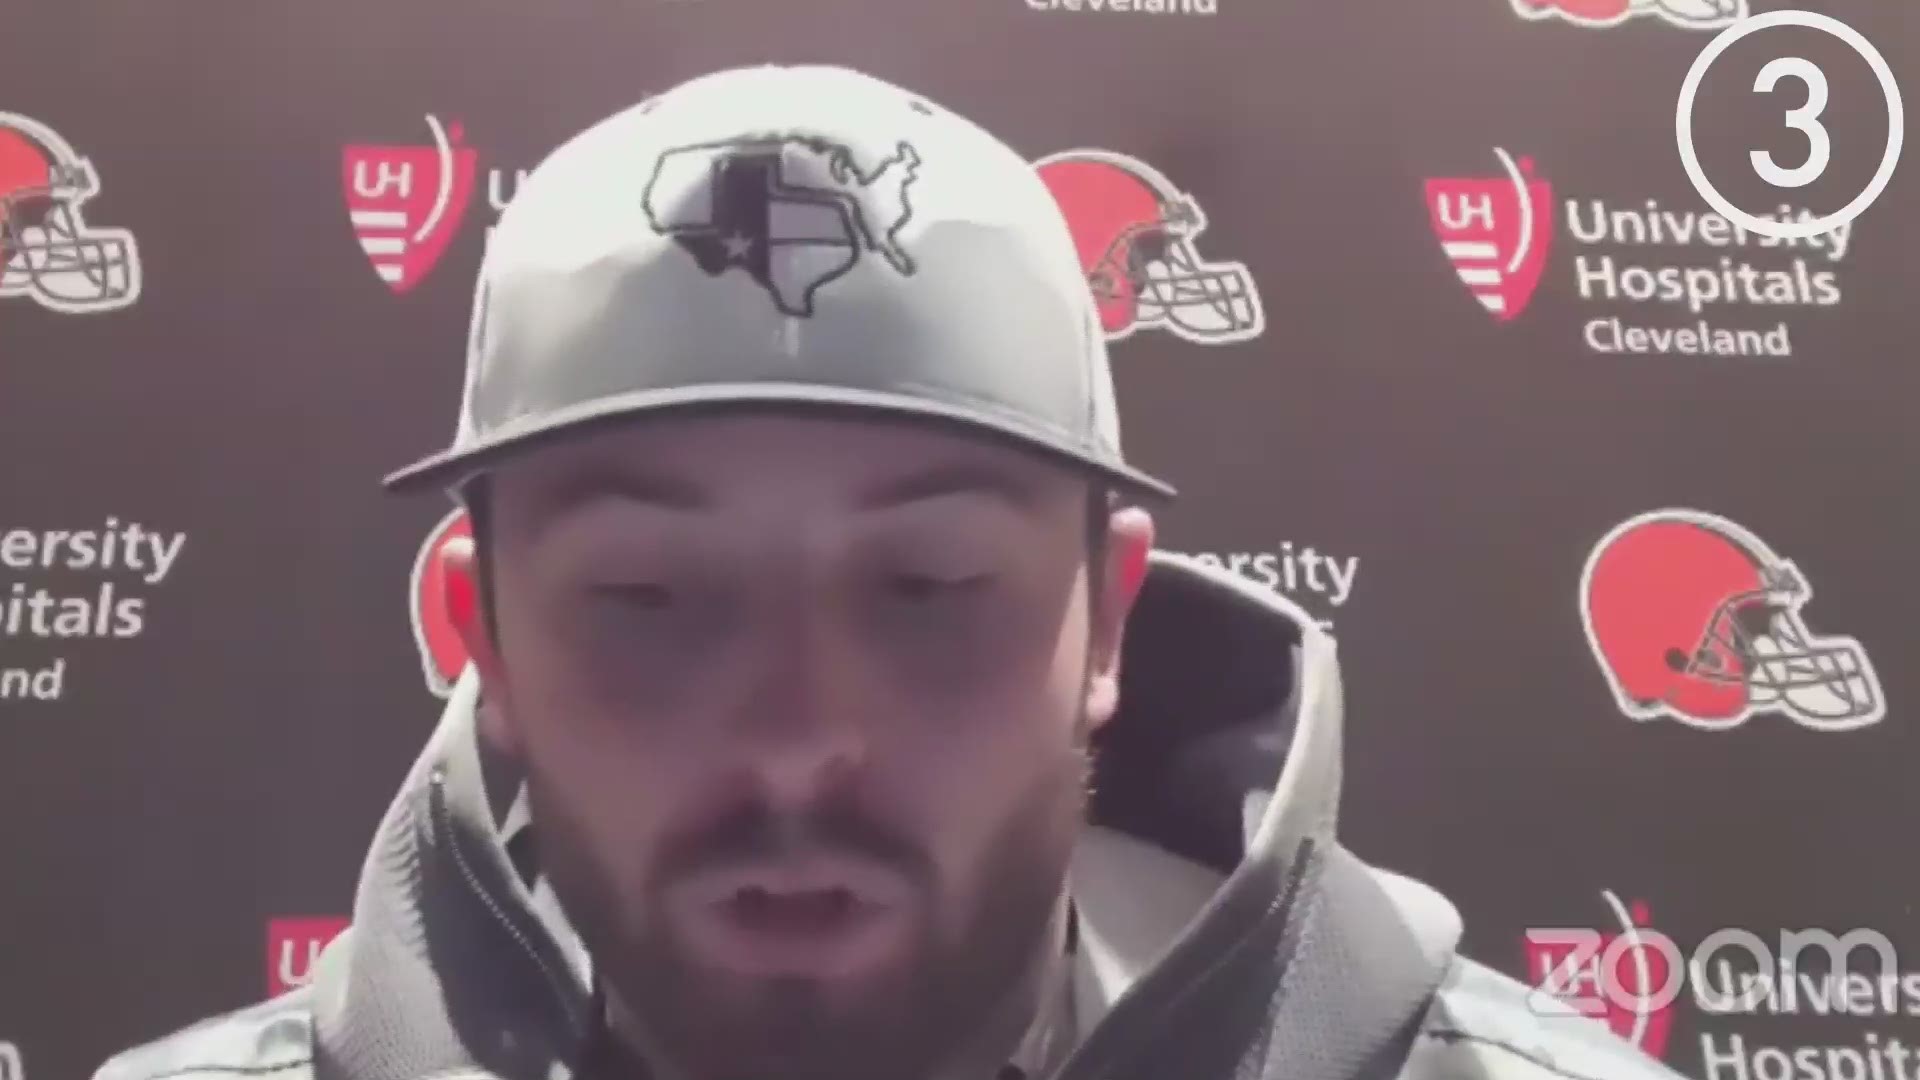 Cleveland Browns quarterback Baker Mayfield referenced Ron Swanson of 'Parks and Rec' following his team's win over the Jacksonville Jaguars on Sunday.